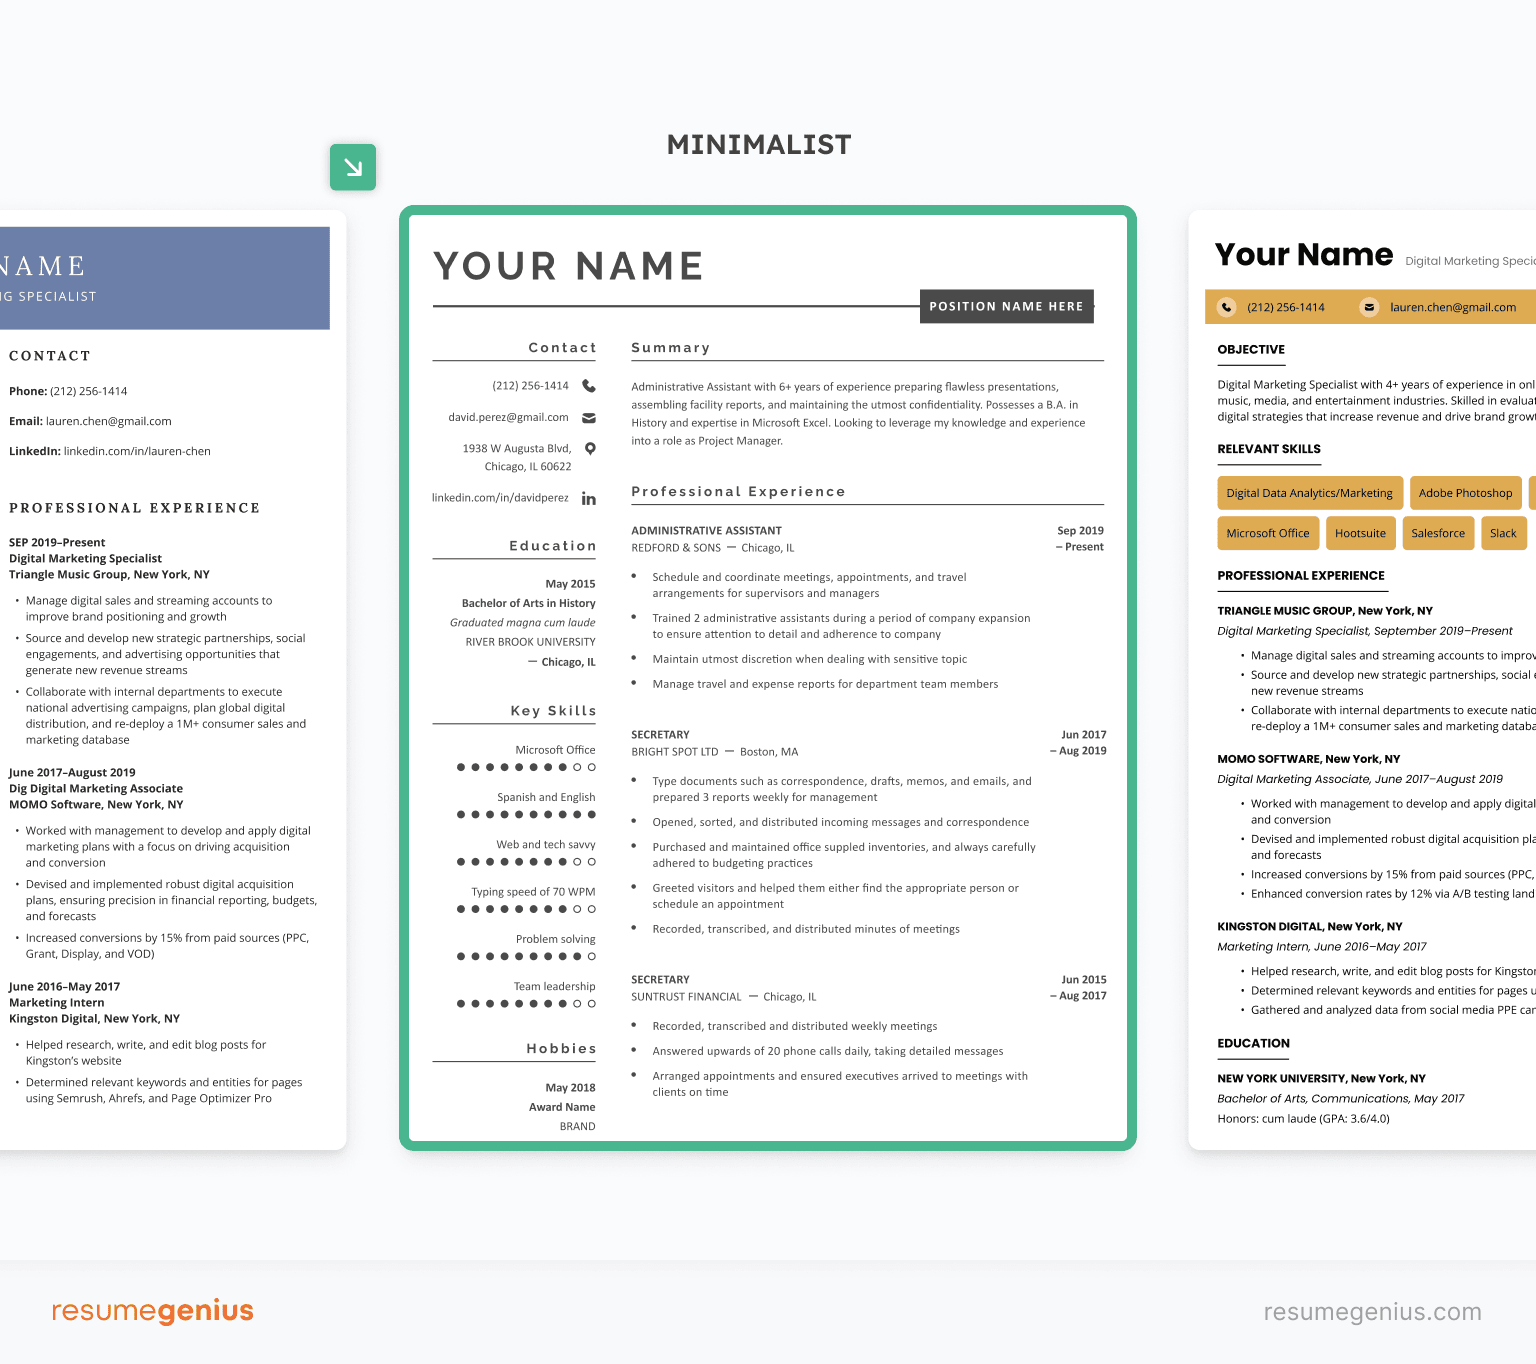 An example of different resume styles, with a modern but minimalist resume featured